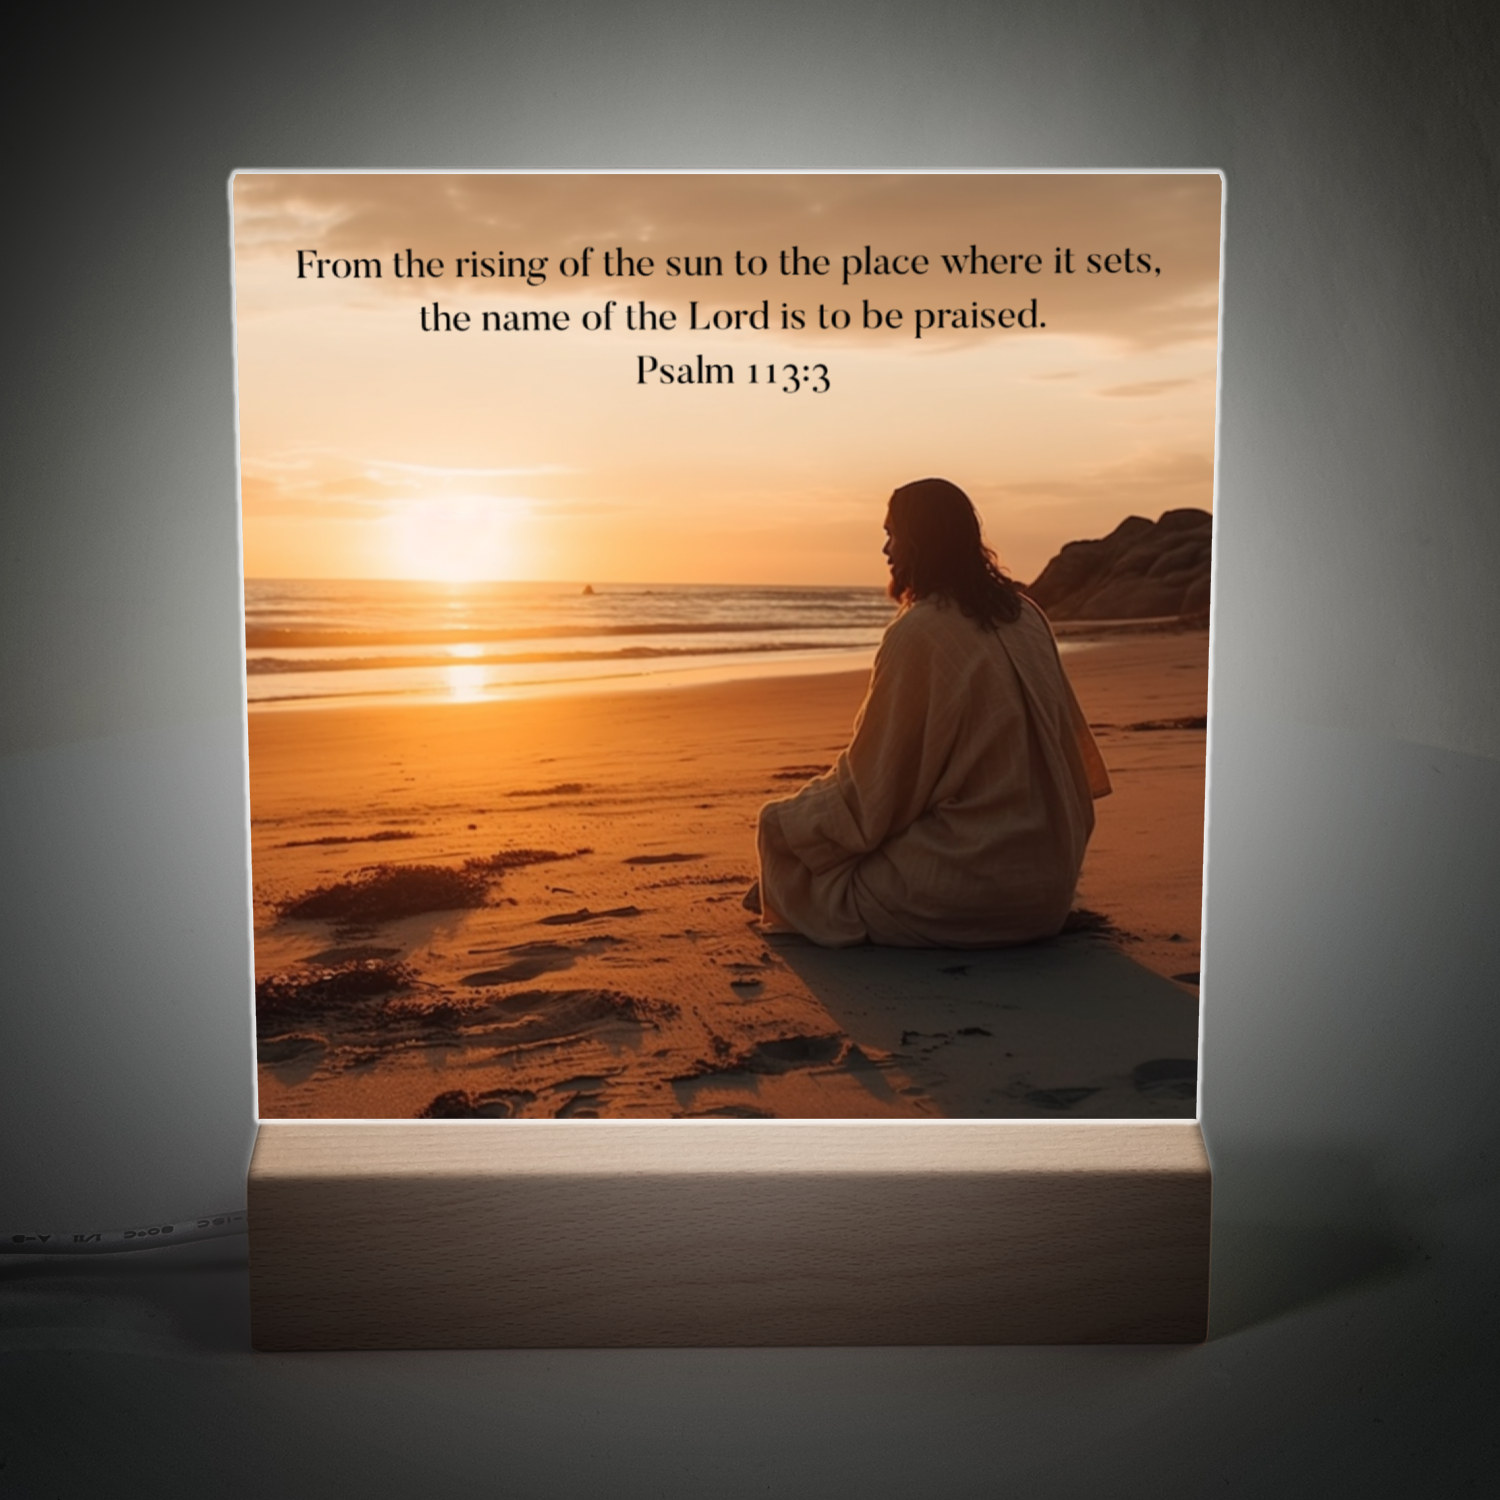 Christian Acrylic Square Plaque | From The Rising Sun To The Place Where It Sets | Psalm 113:3 - Mardonyx